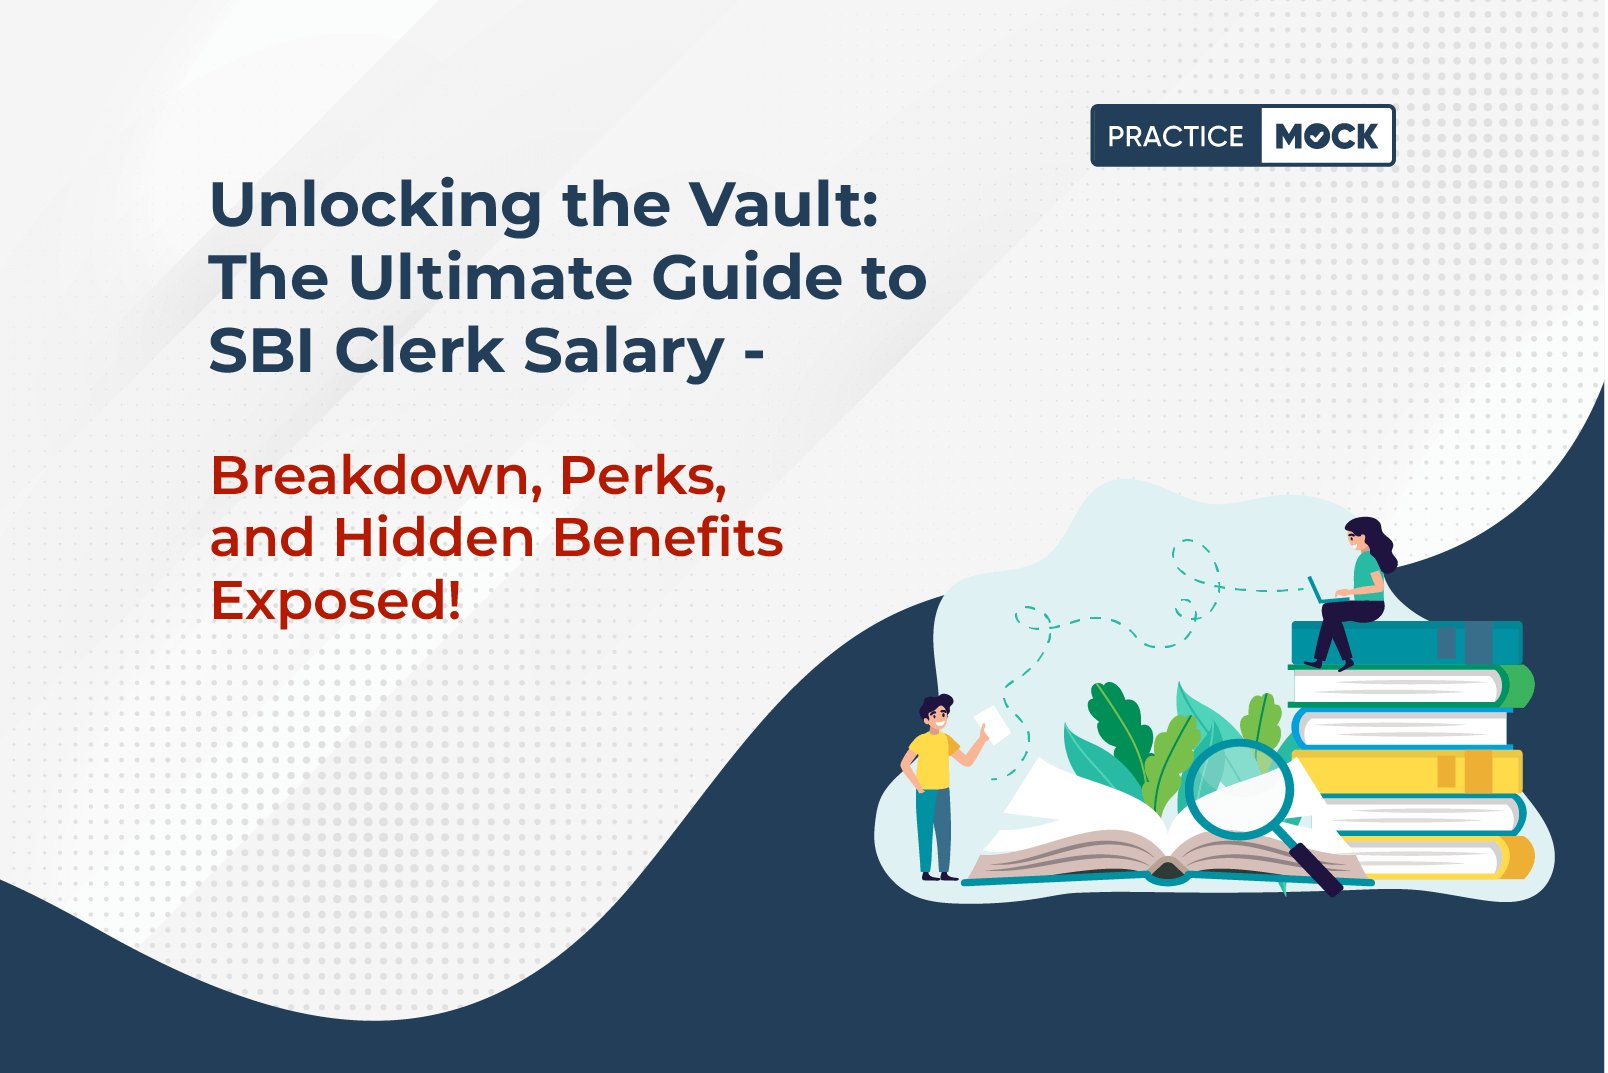 Unlocking the Vault The Ultimate Guide to SBI Clerk Salary - Breakdown, Perks, and Hidden Benefits Exposed! (1)